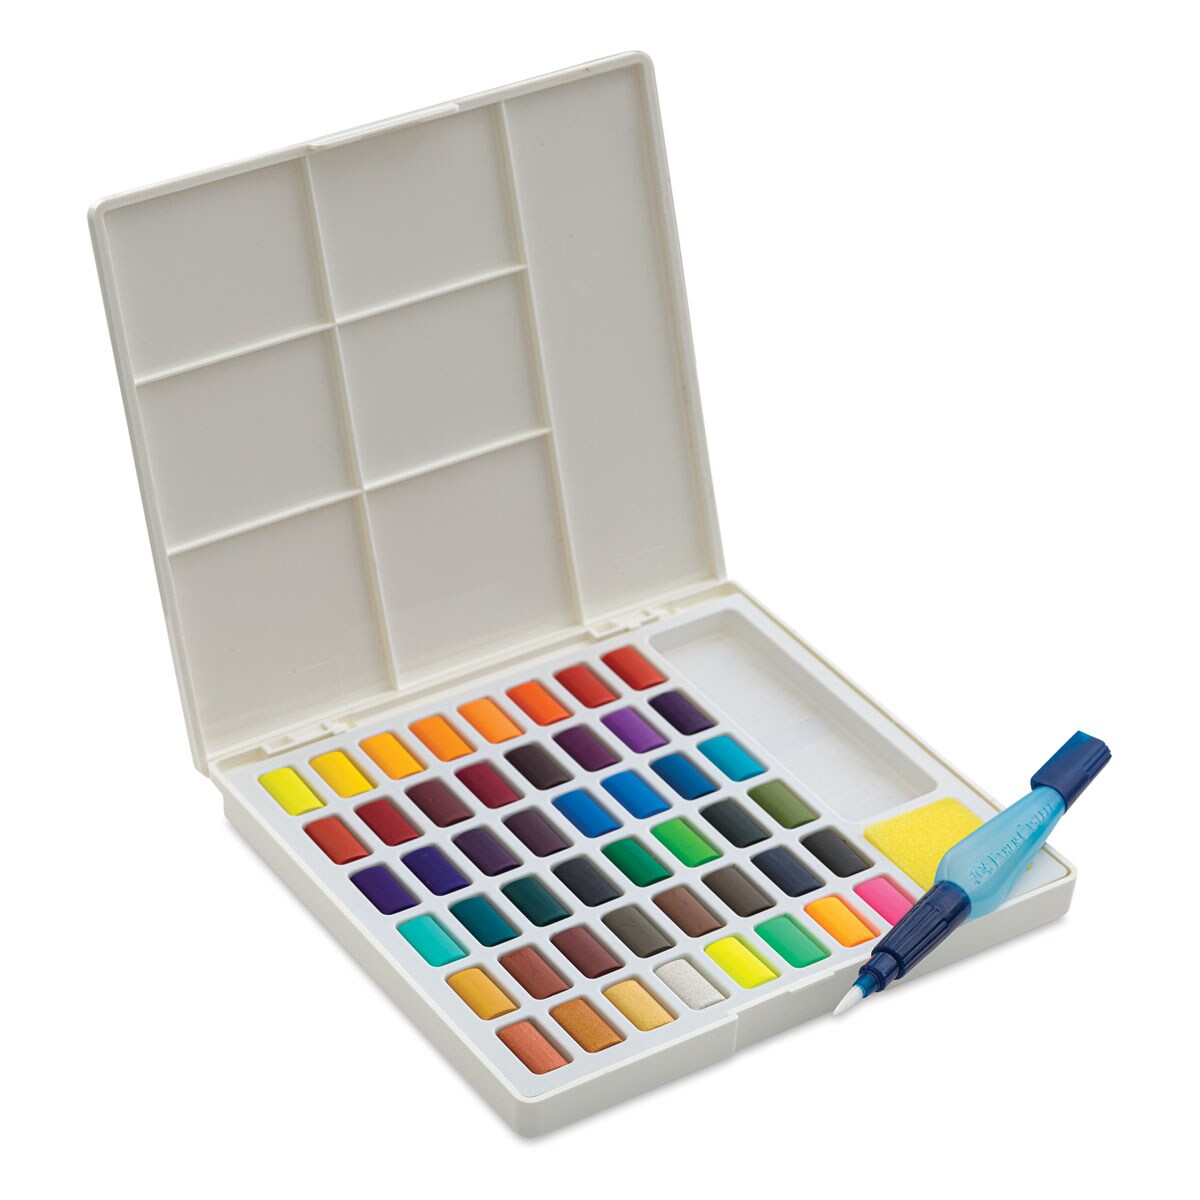 Faber Castell Creative Studio Half Pan Watercolor Sets - Assorted Colors, Set of 48